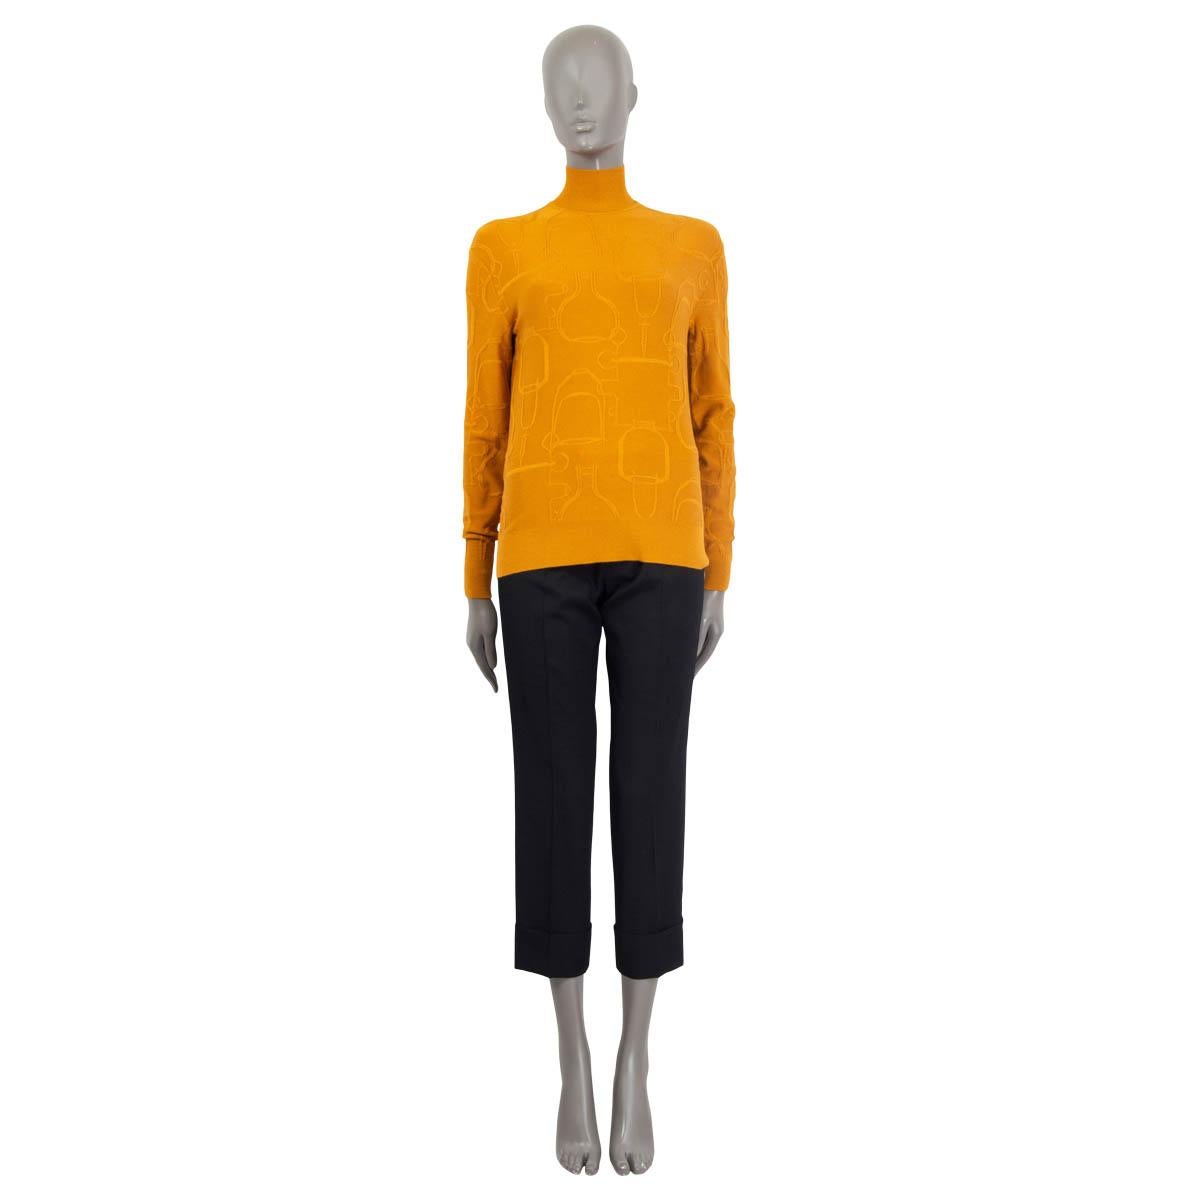 100% authentic Hermès oversized knit sweater in ochre cashmere (44%), silk (43%), polyamide (10%) and polyurethane (3%). Features a stirrup pattern, long sleeves and a high neck. Unlined. Has been worn and is in excellent